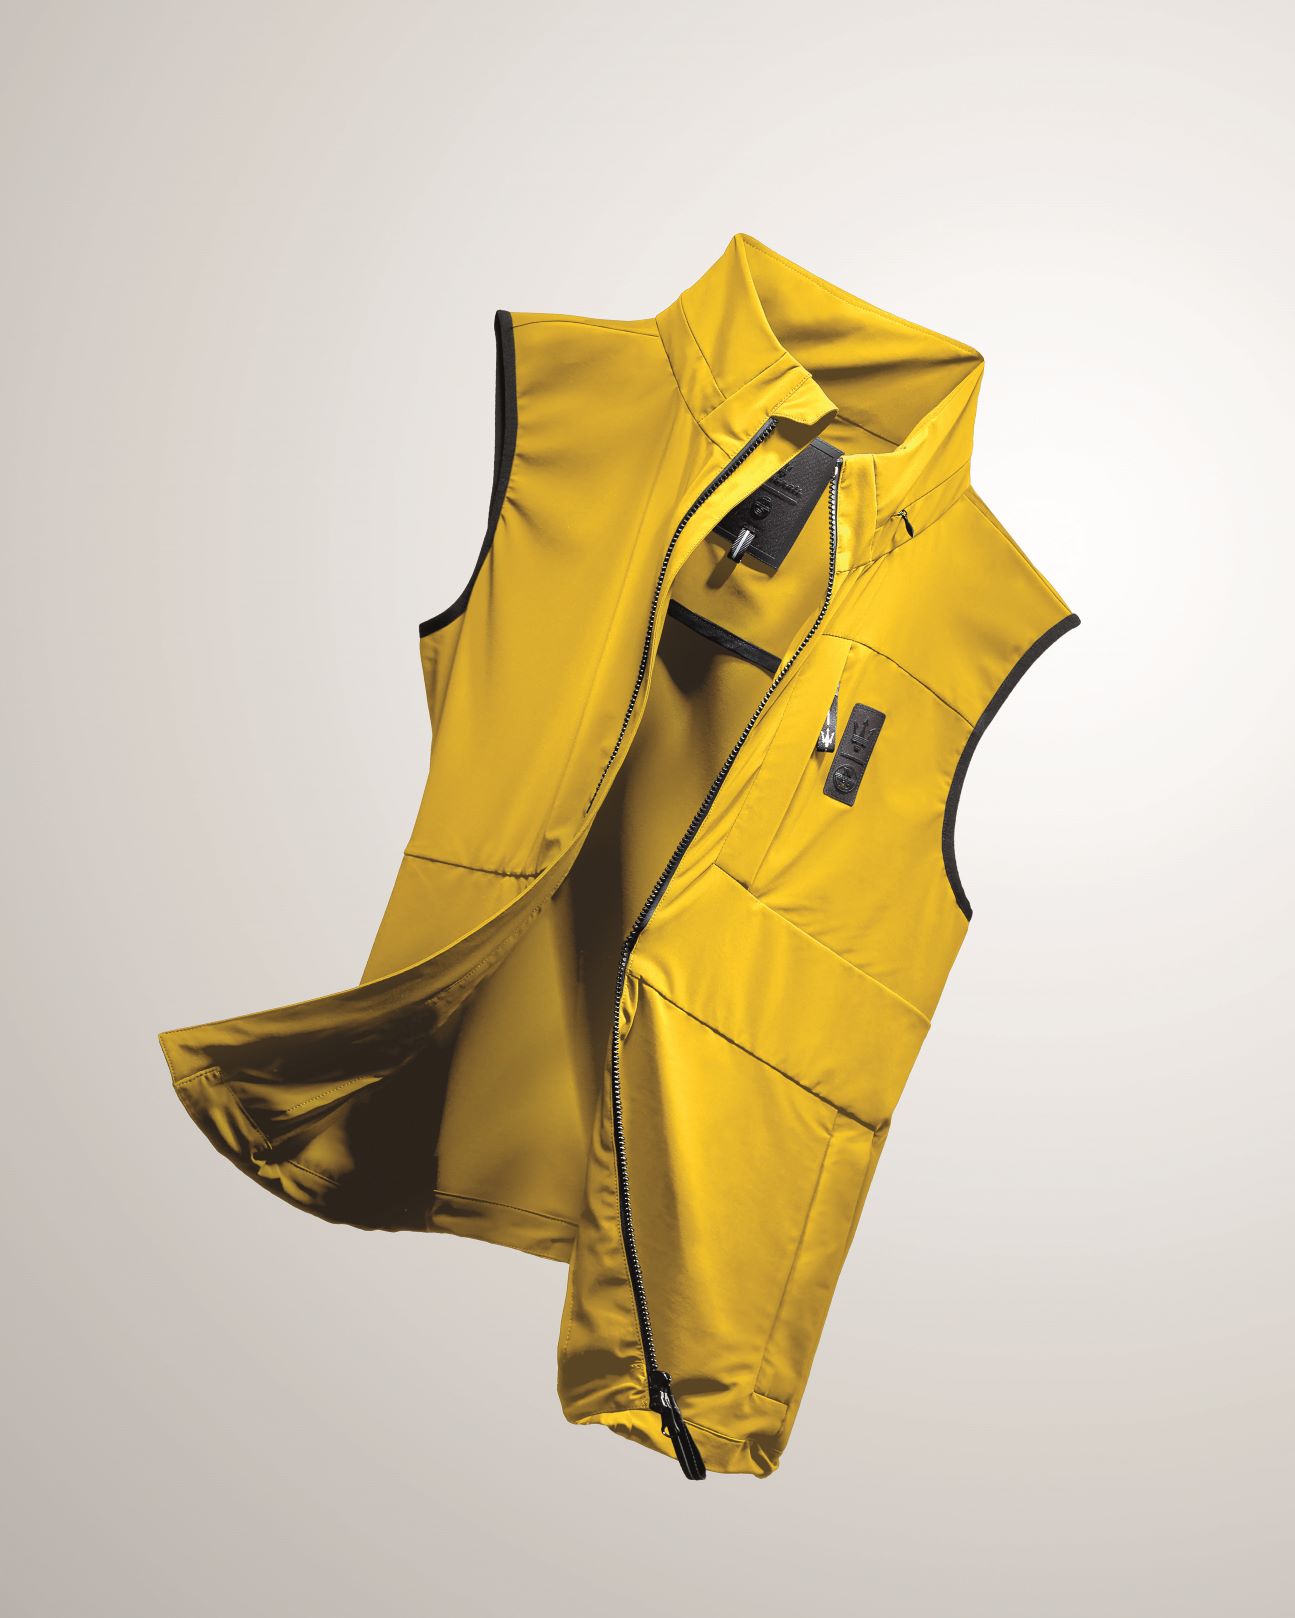 An insulated vest from the Maserati x North Sails collection. Colour is Maserati yellow